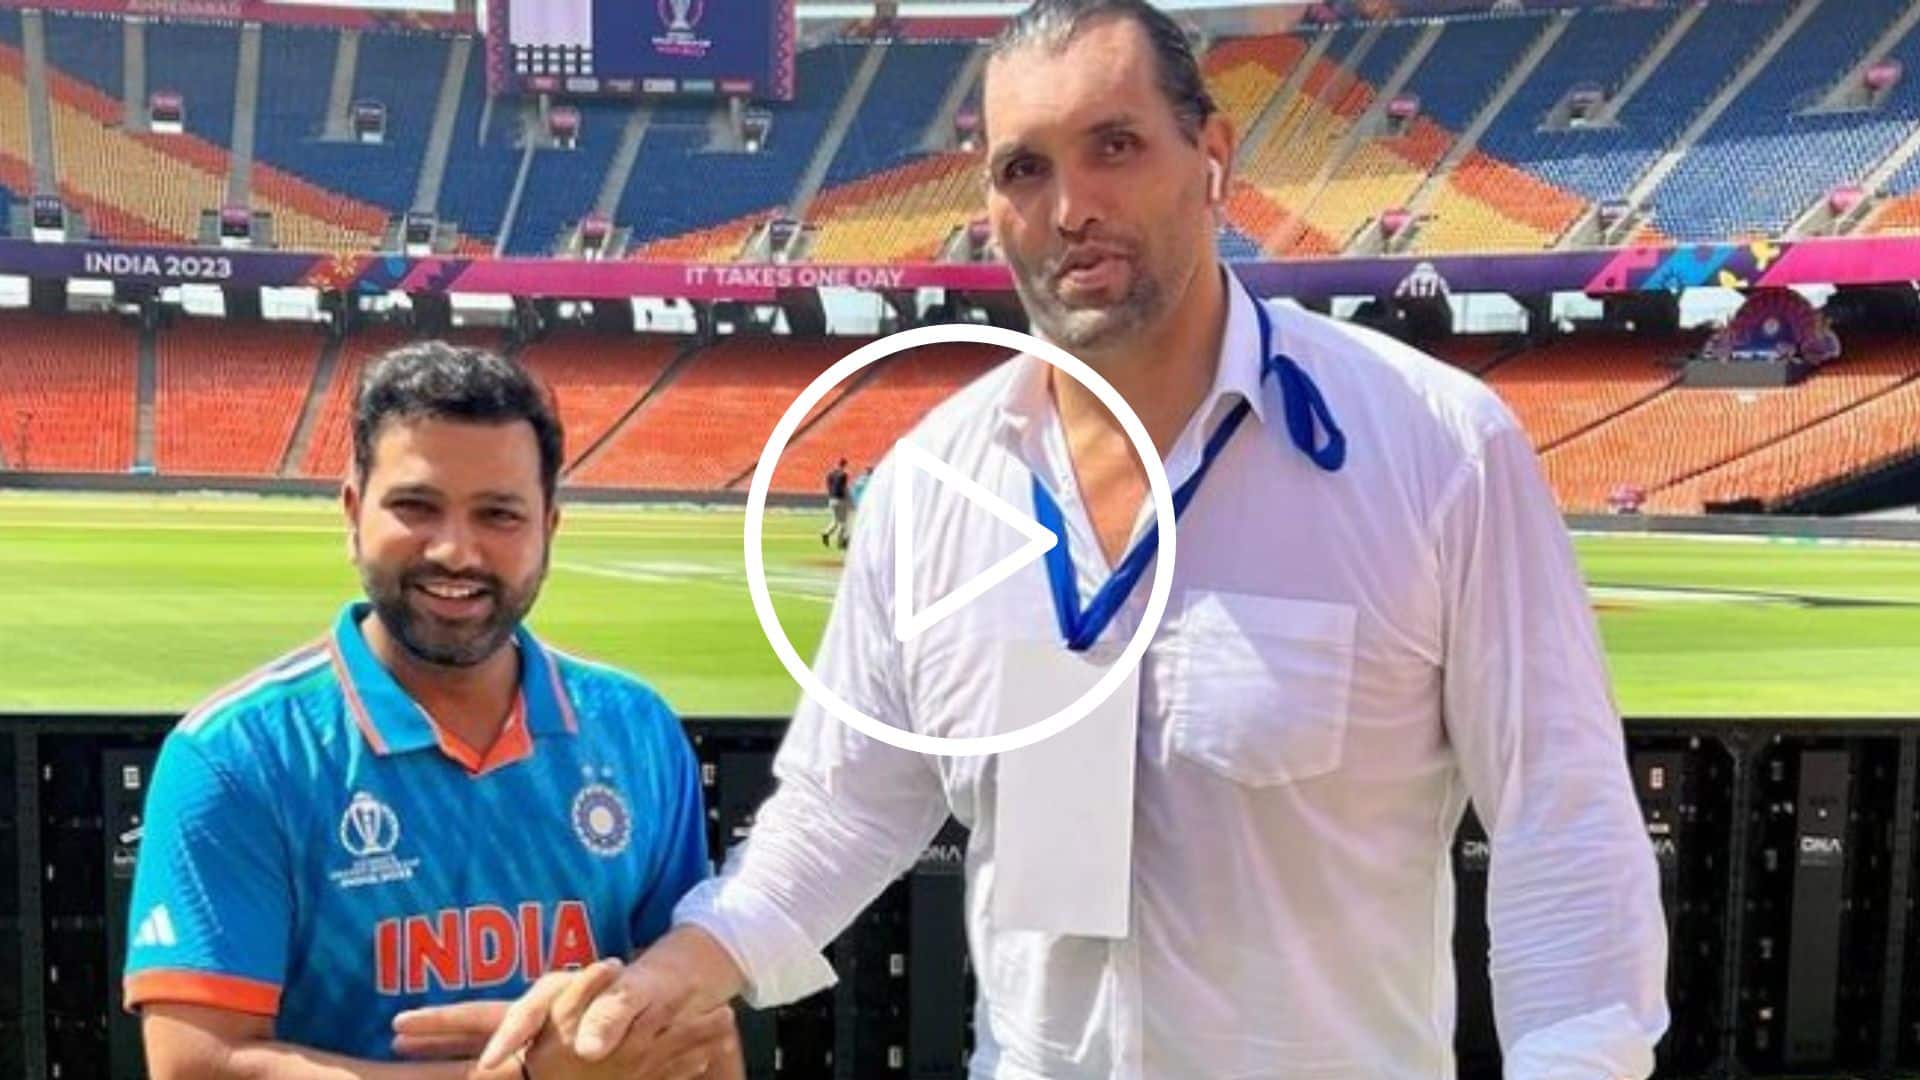 [Watch] The Great Khali Shares A Message For Pak After Meeting Rohit Sharma